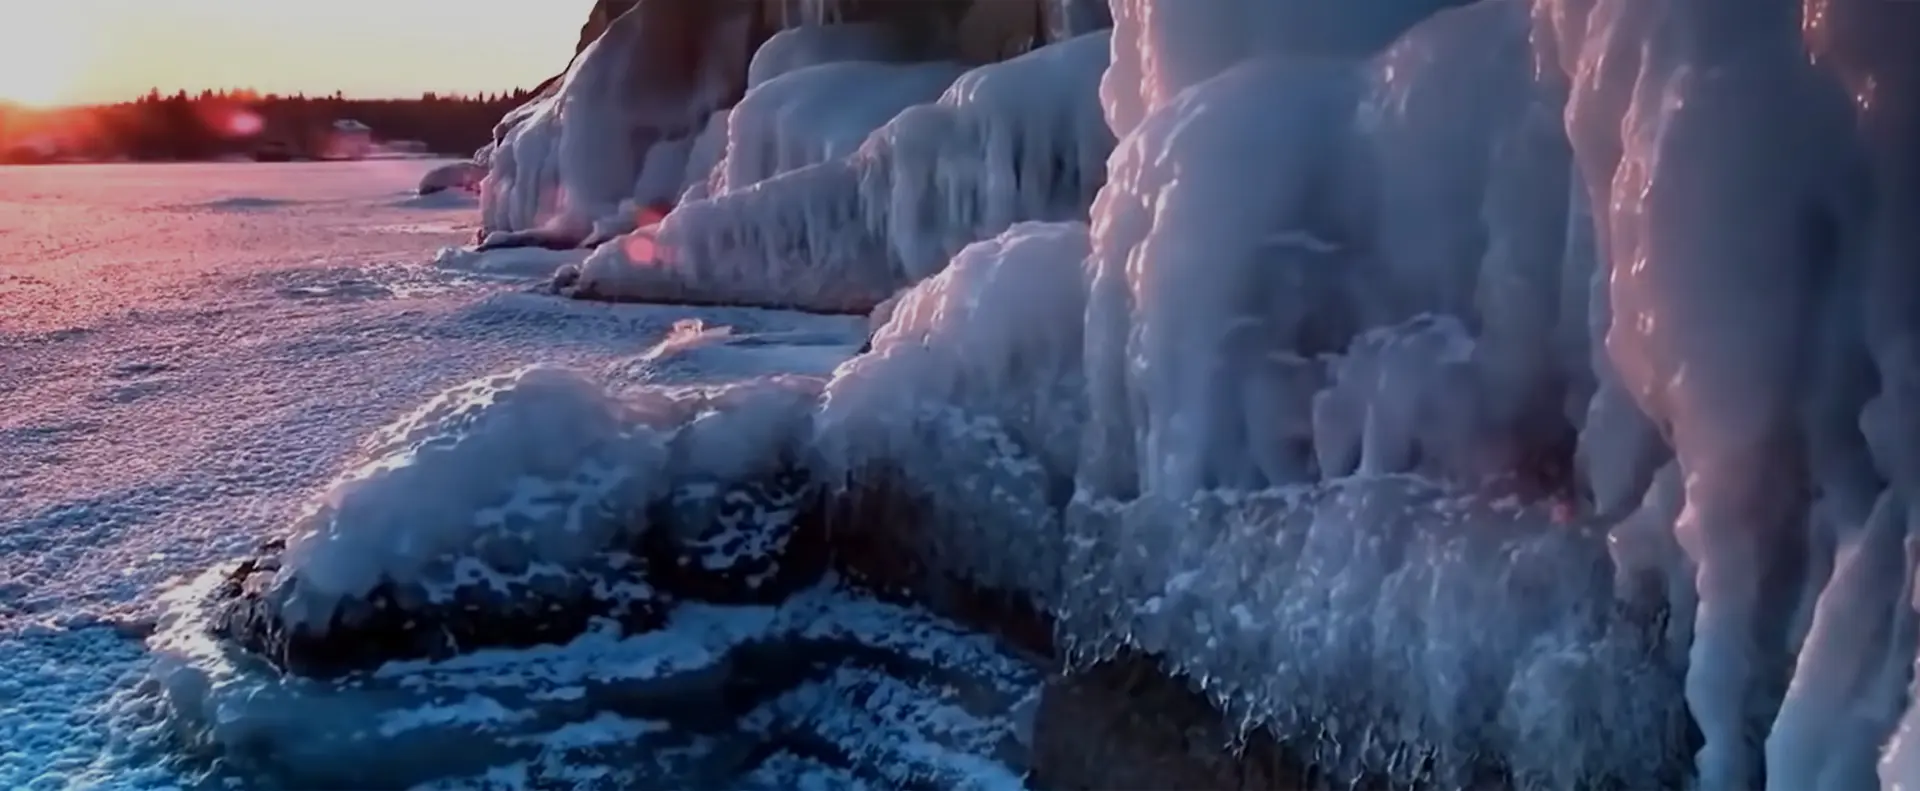 A close up of some ice formations on the water